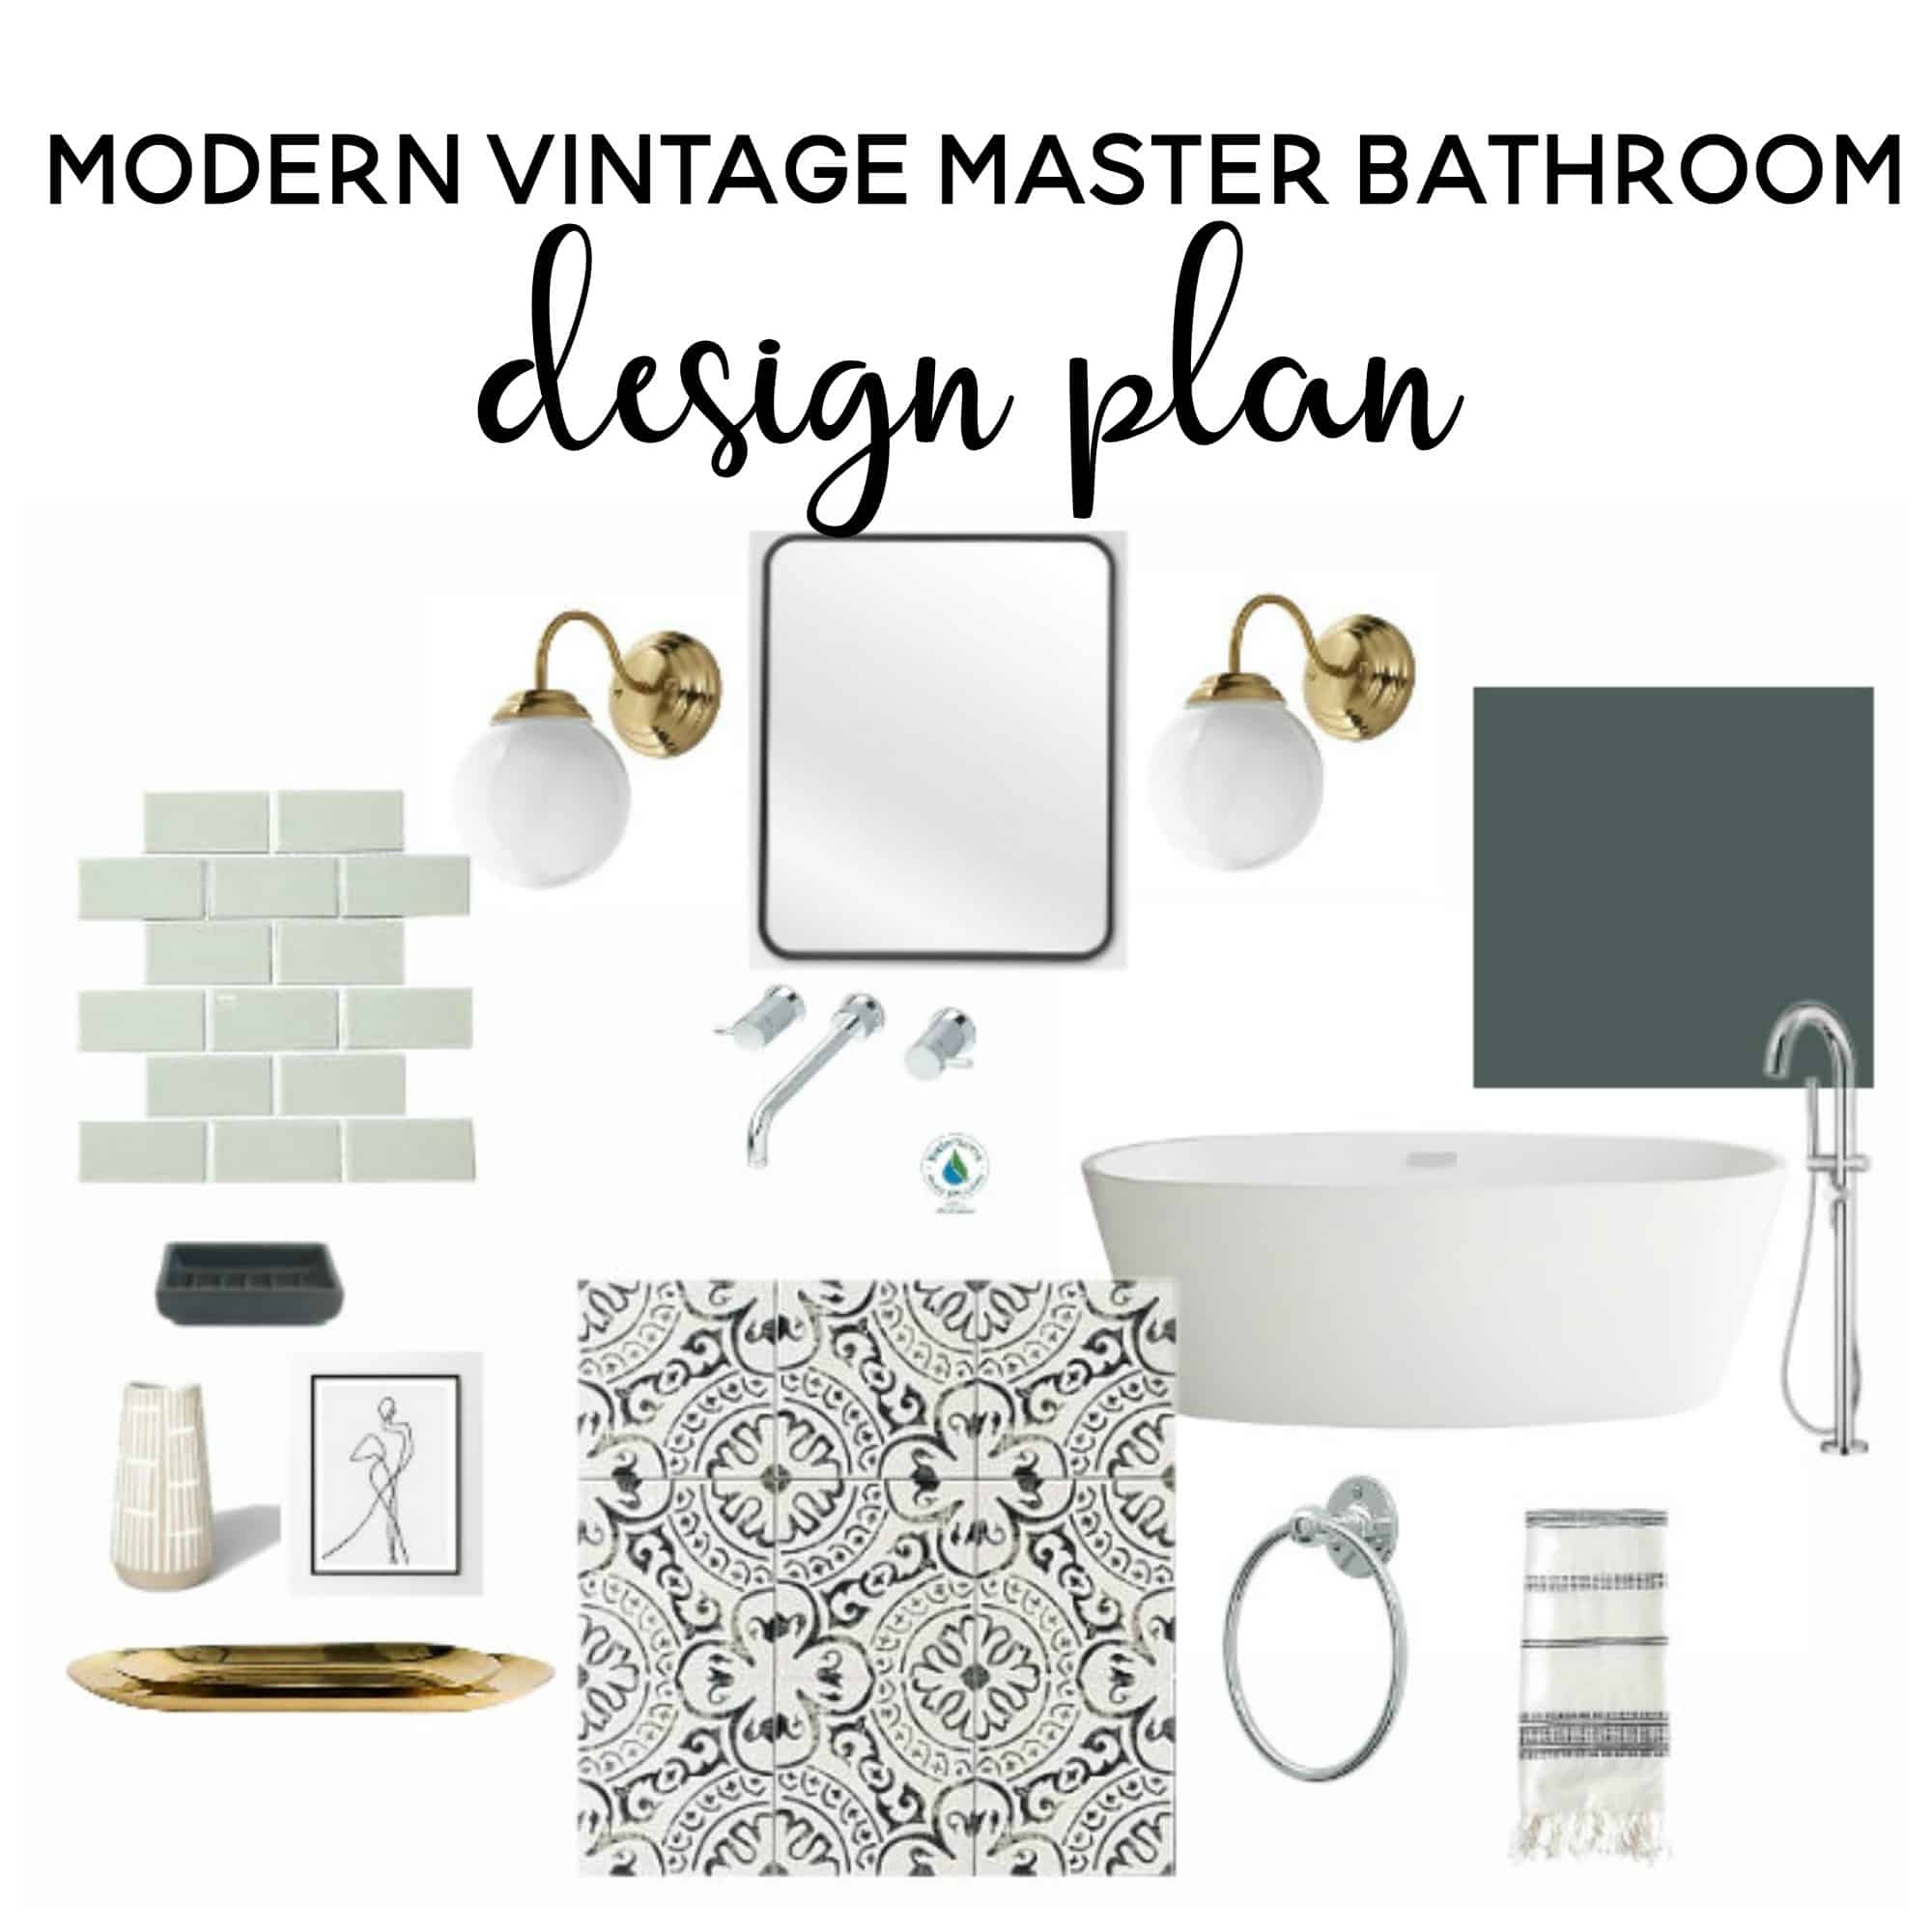 The design plan for our master bathroom remodel - samples of all our favorite modern vintage pieces, including tiles, fixtures, paint, decor and more.